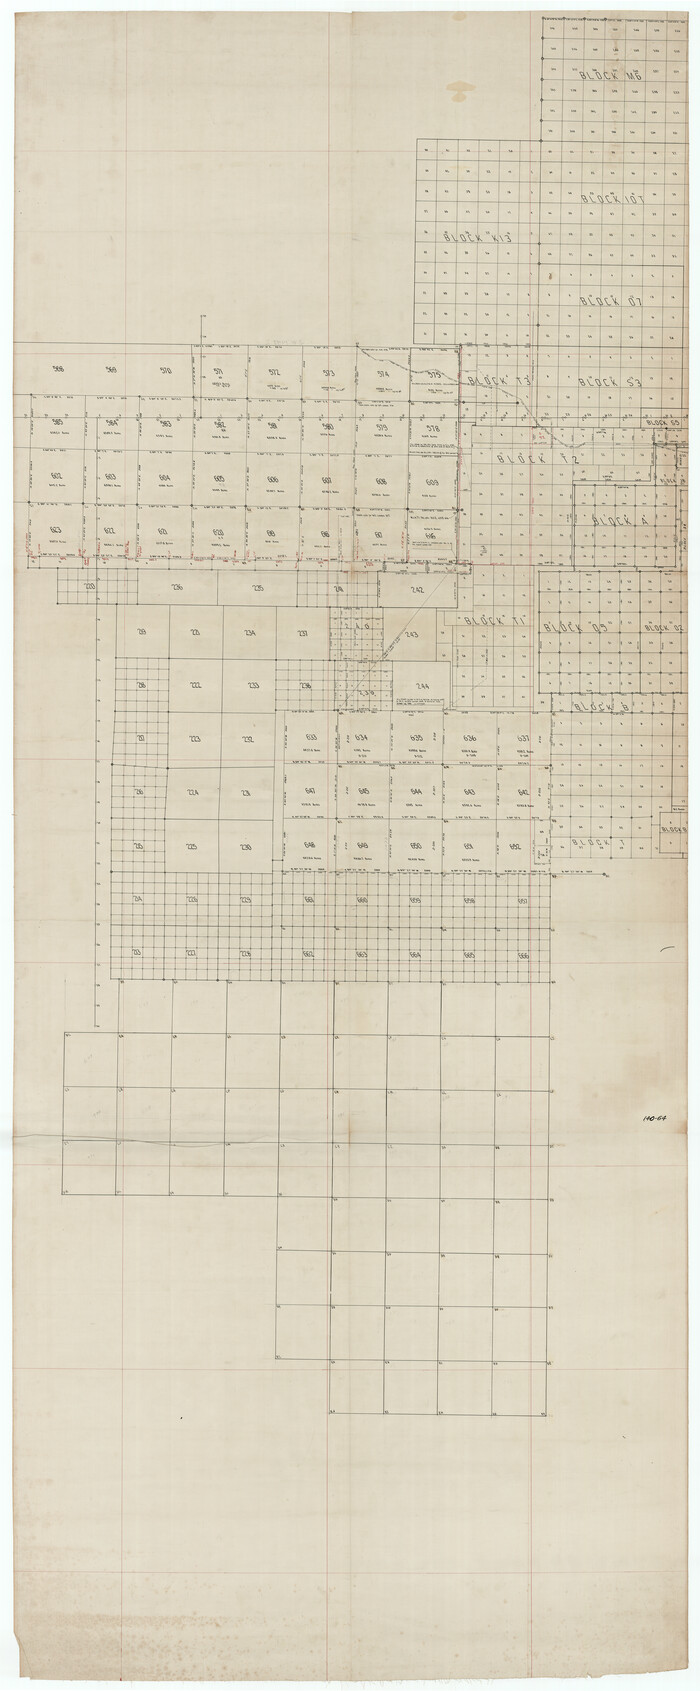 93194, [Capitol Land Leagues and Blocks M6, 10T, T1, O5 and part of Block B], Twichell Survey Records